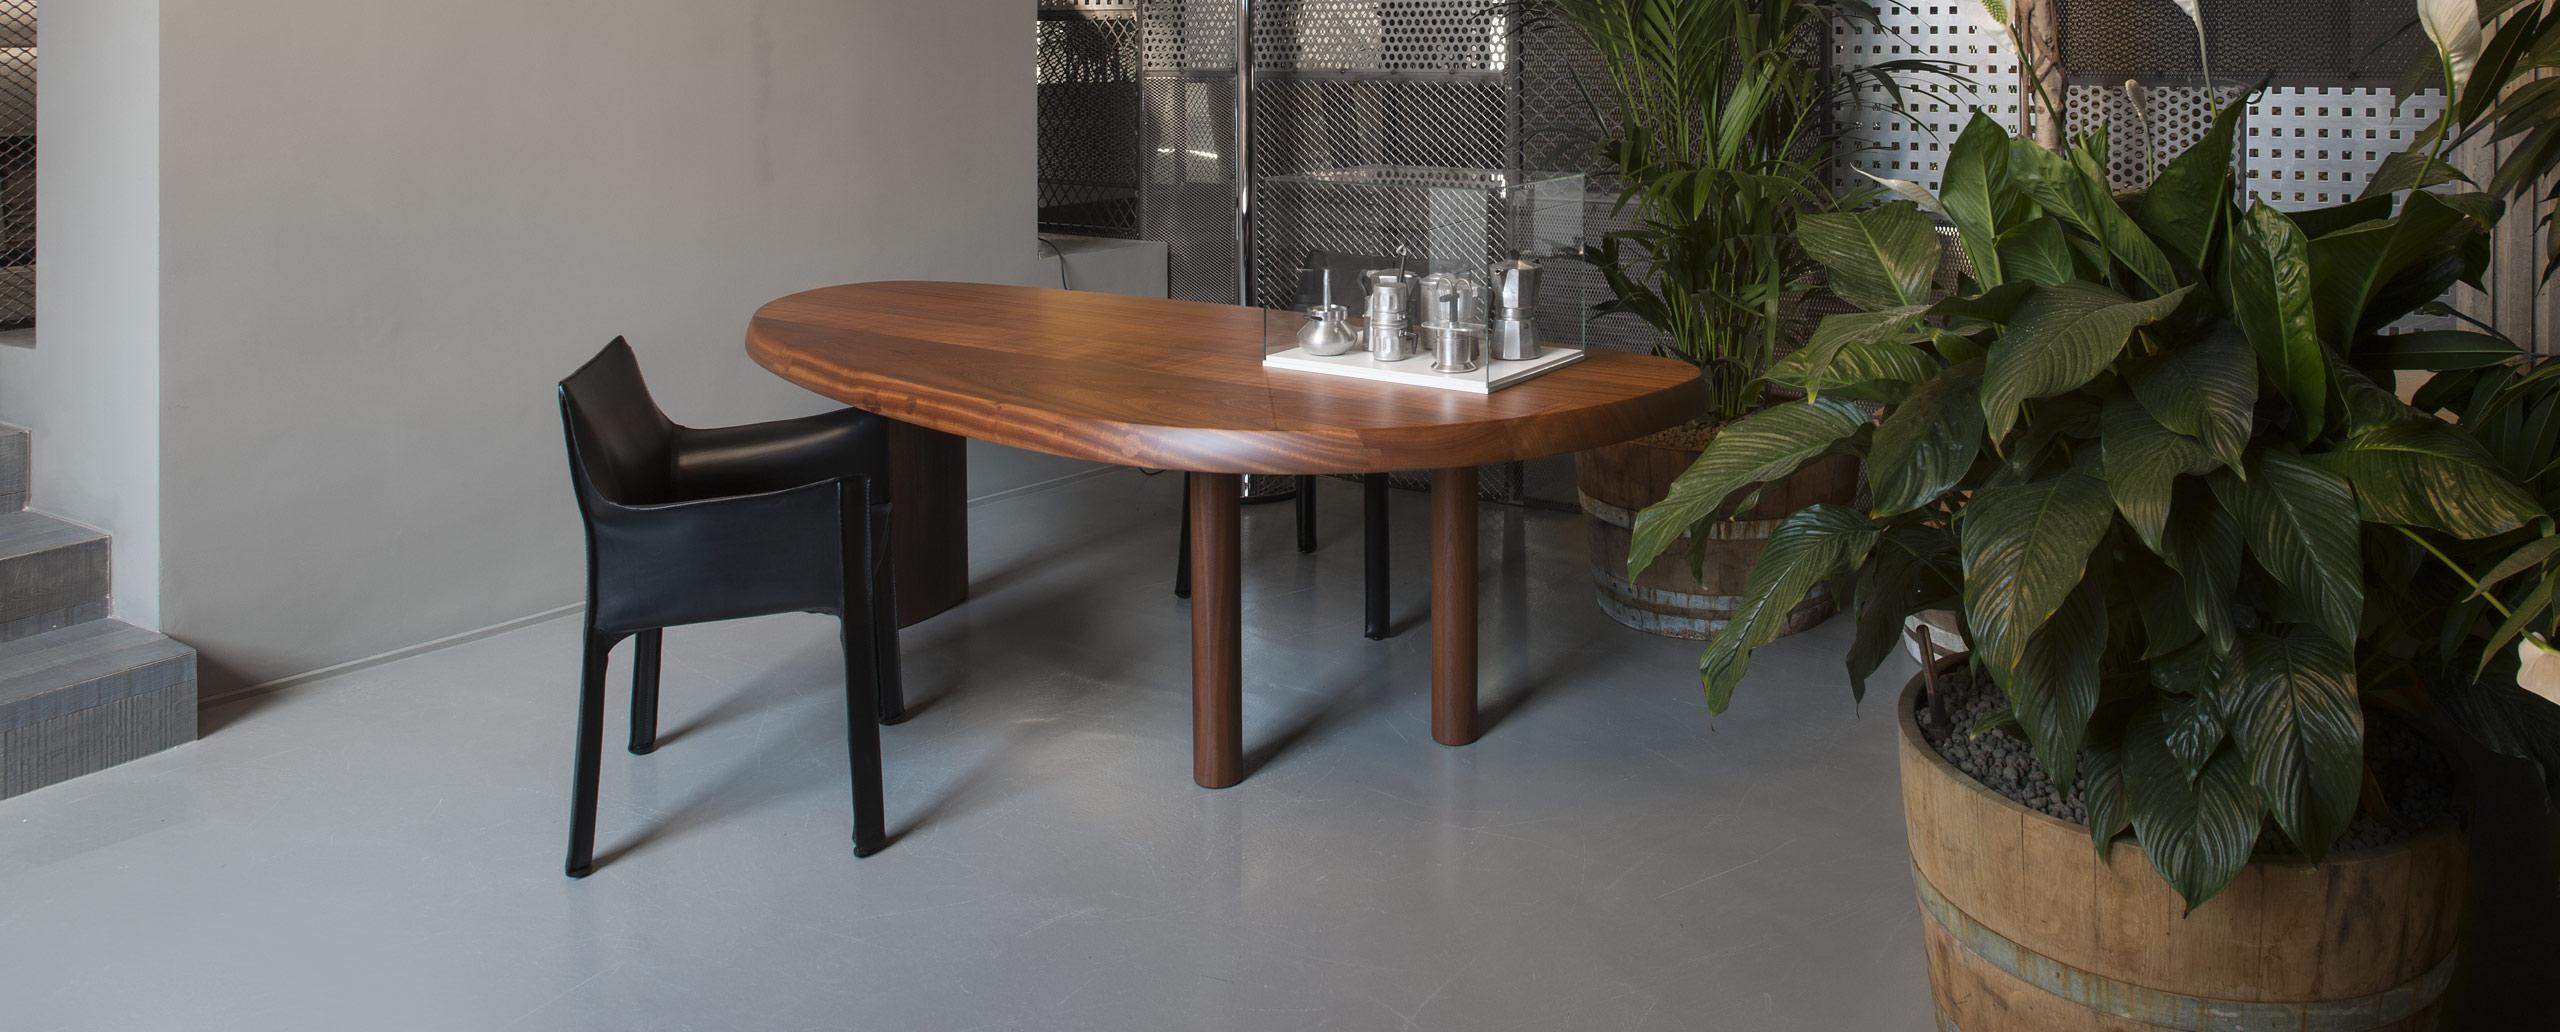 Contemporary Charlotte Perriand Table En Forme Libre, Glacé Brown Lacquered Wood by Cassina For Sale